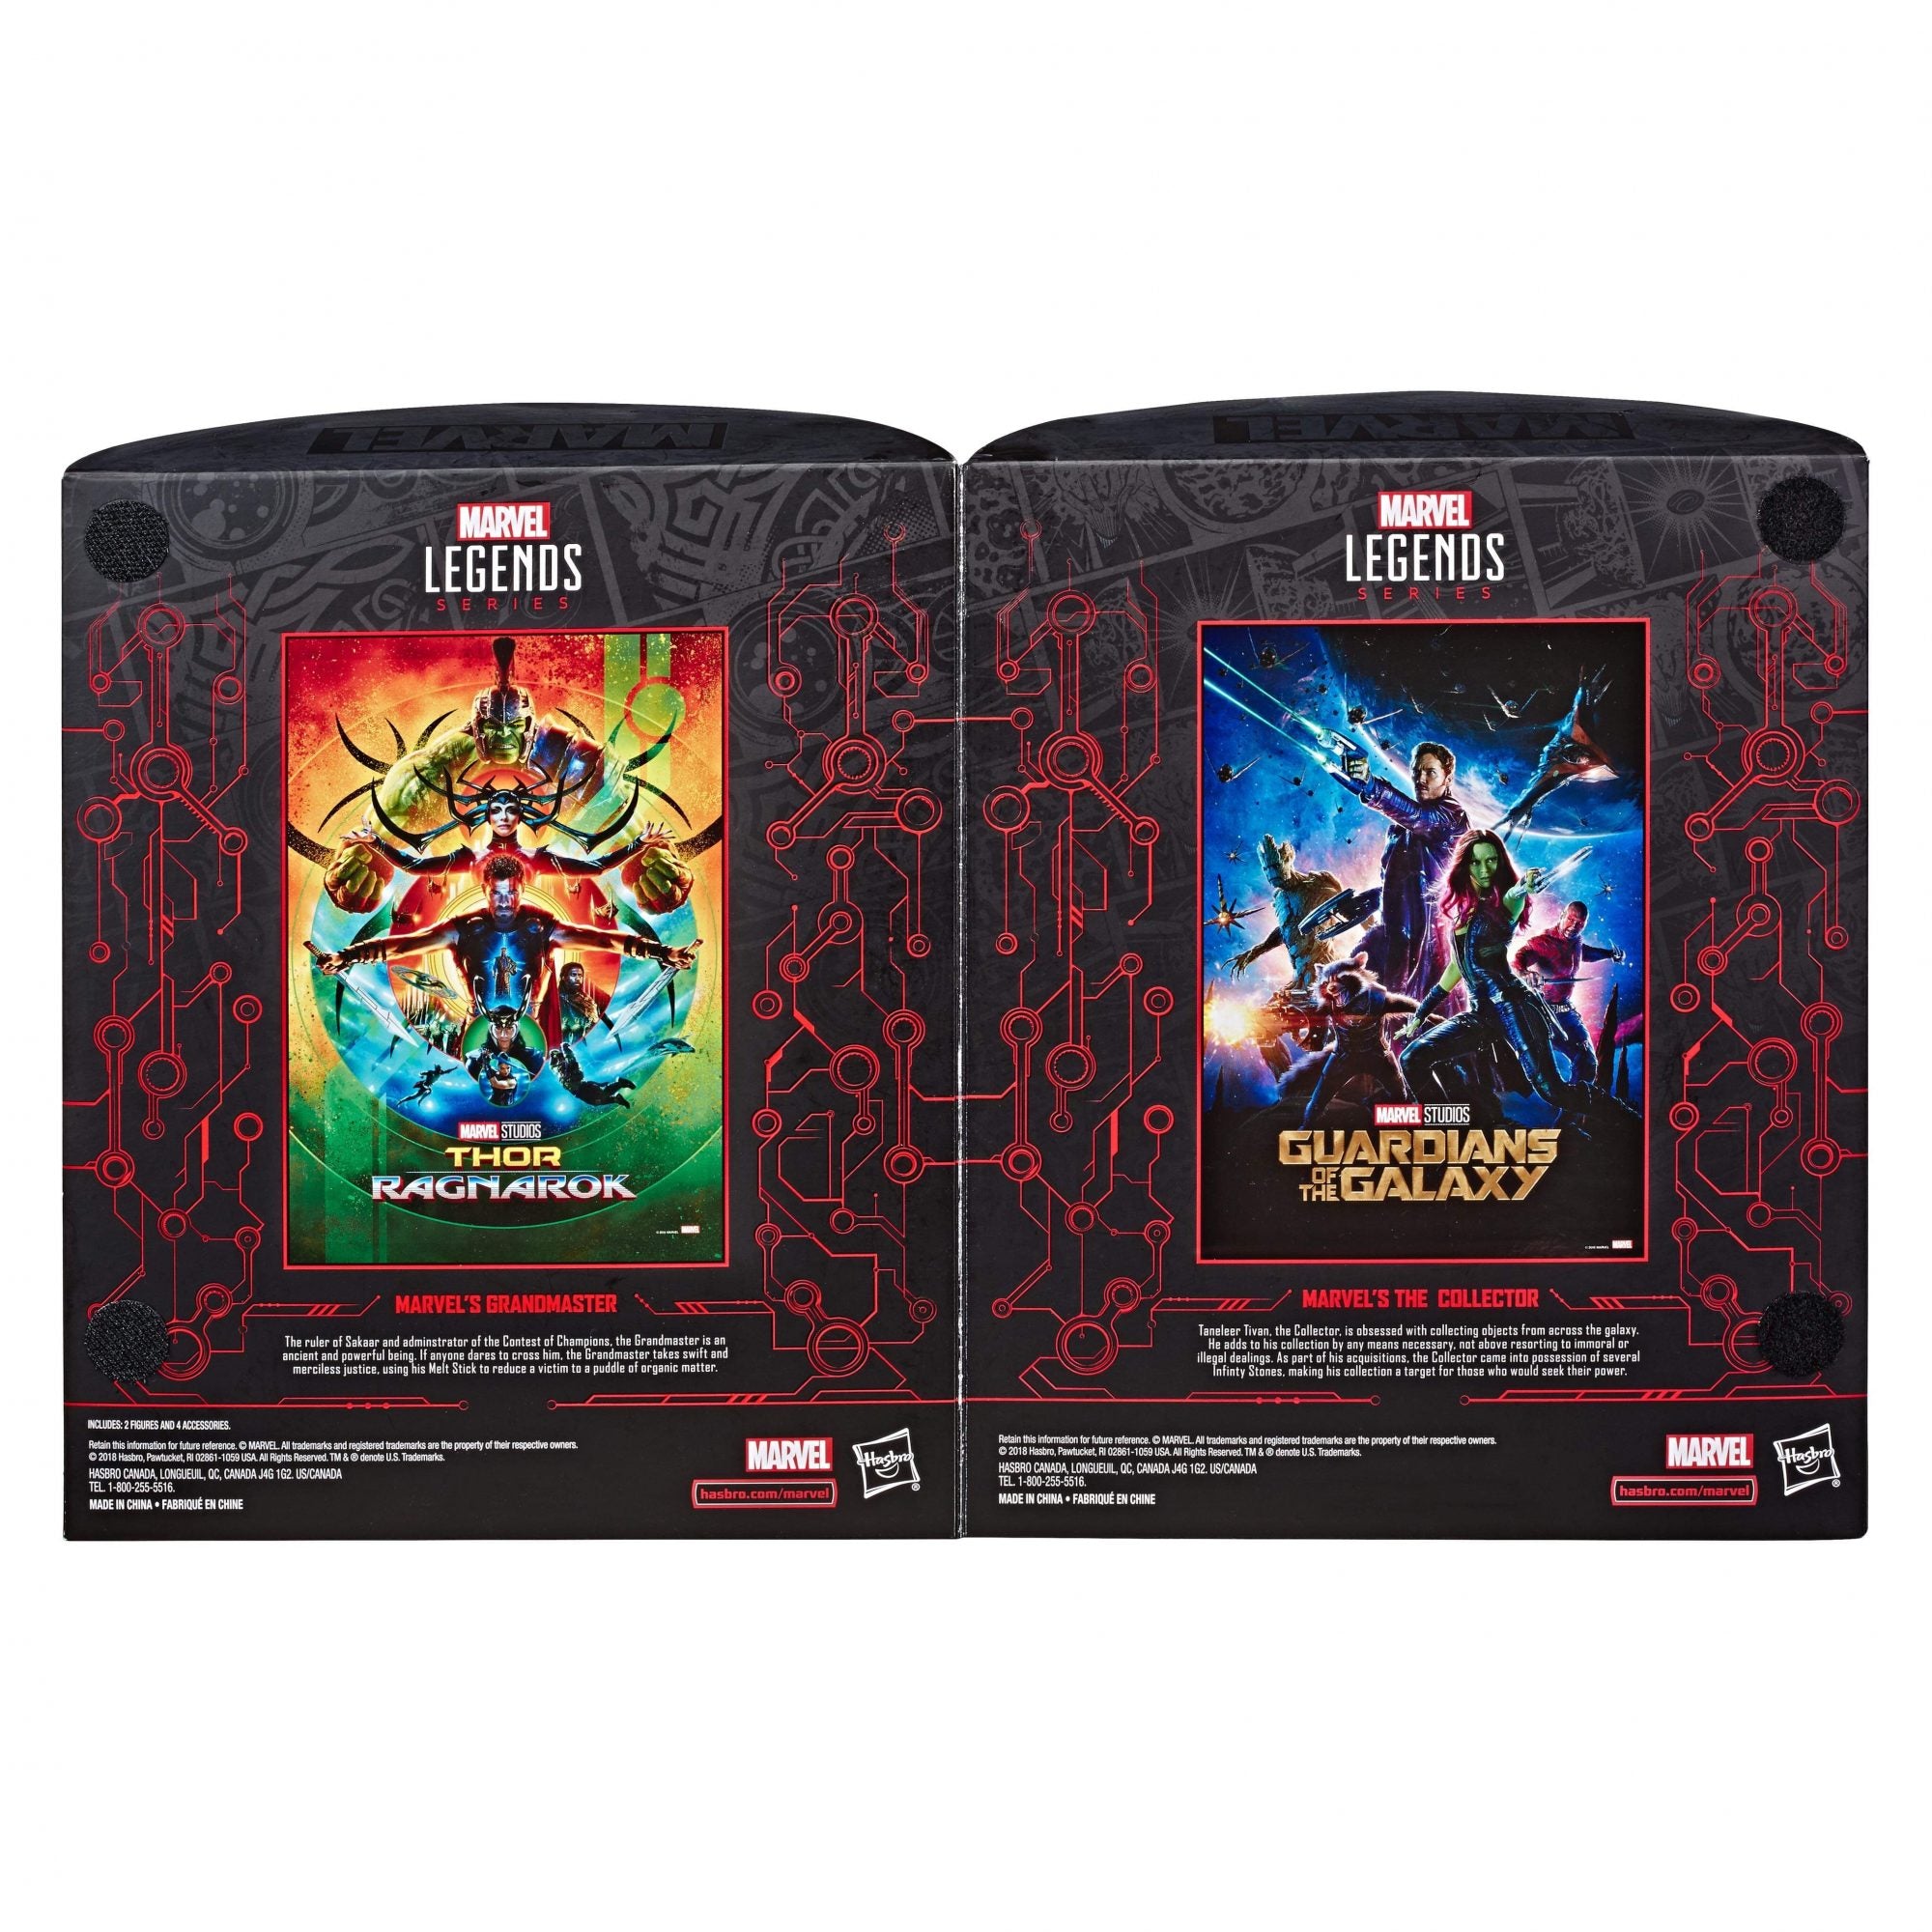 SDCC 2019 Hasbro Marvel Legends Series The Collector & Grandmaster 2-Pack Action Figure Exclusive